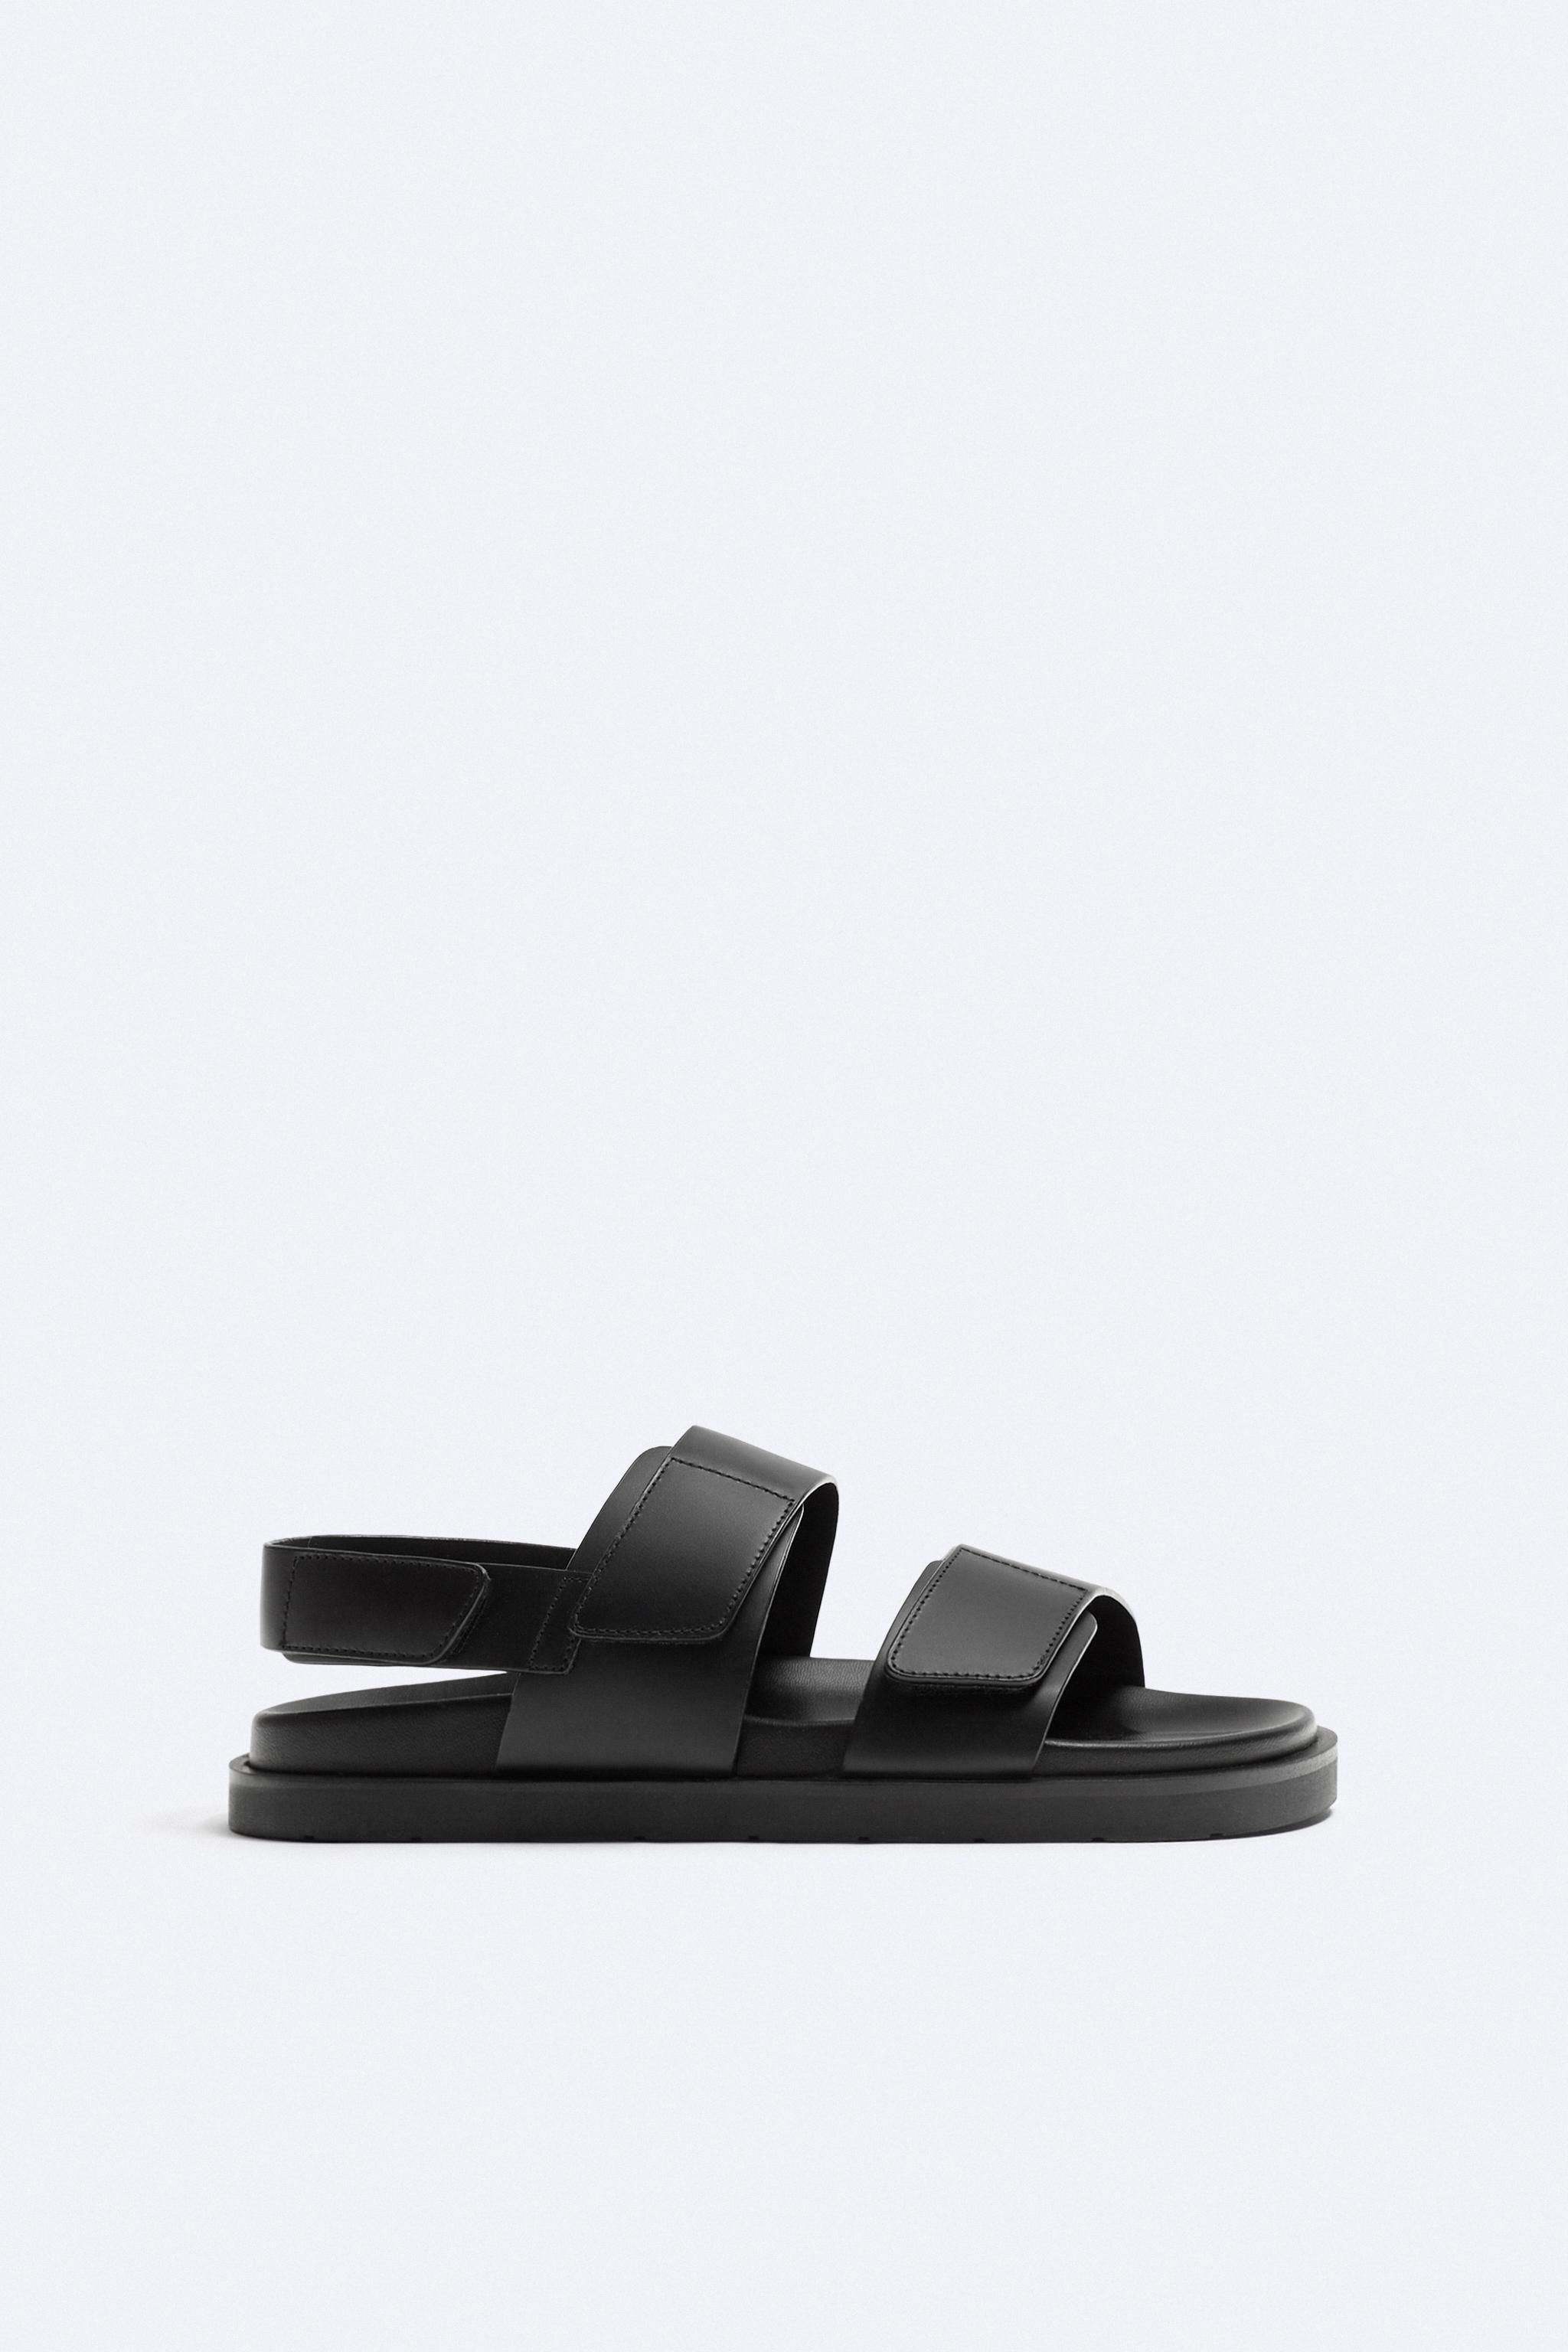 LEATHER DOUBLE STRAP SANDALS by ZARA